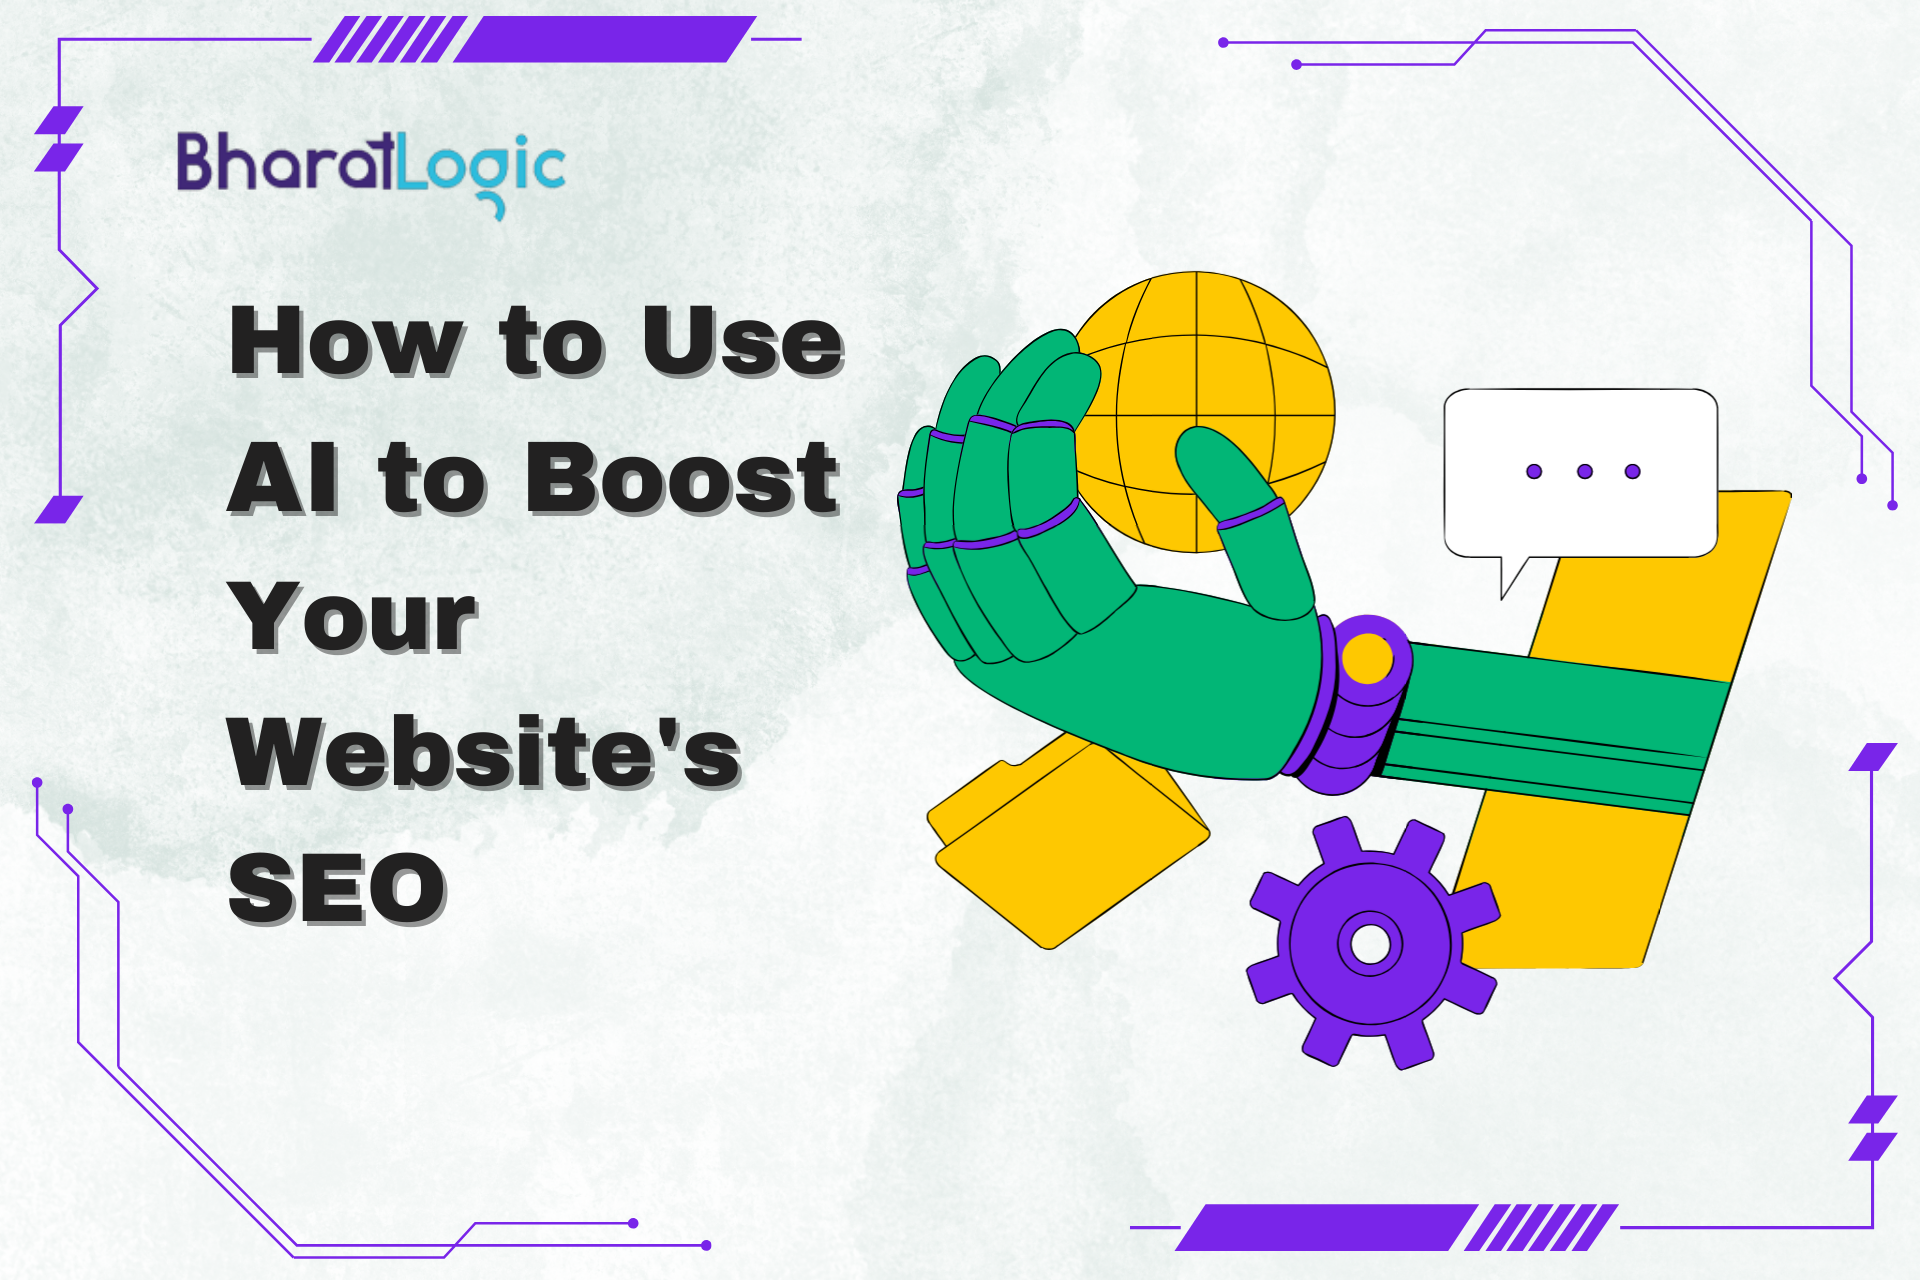 How to Use Artificial Intelligence to Boost Your Website's SEO